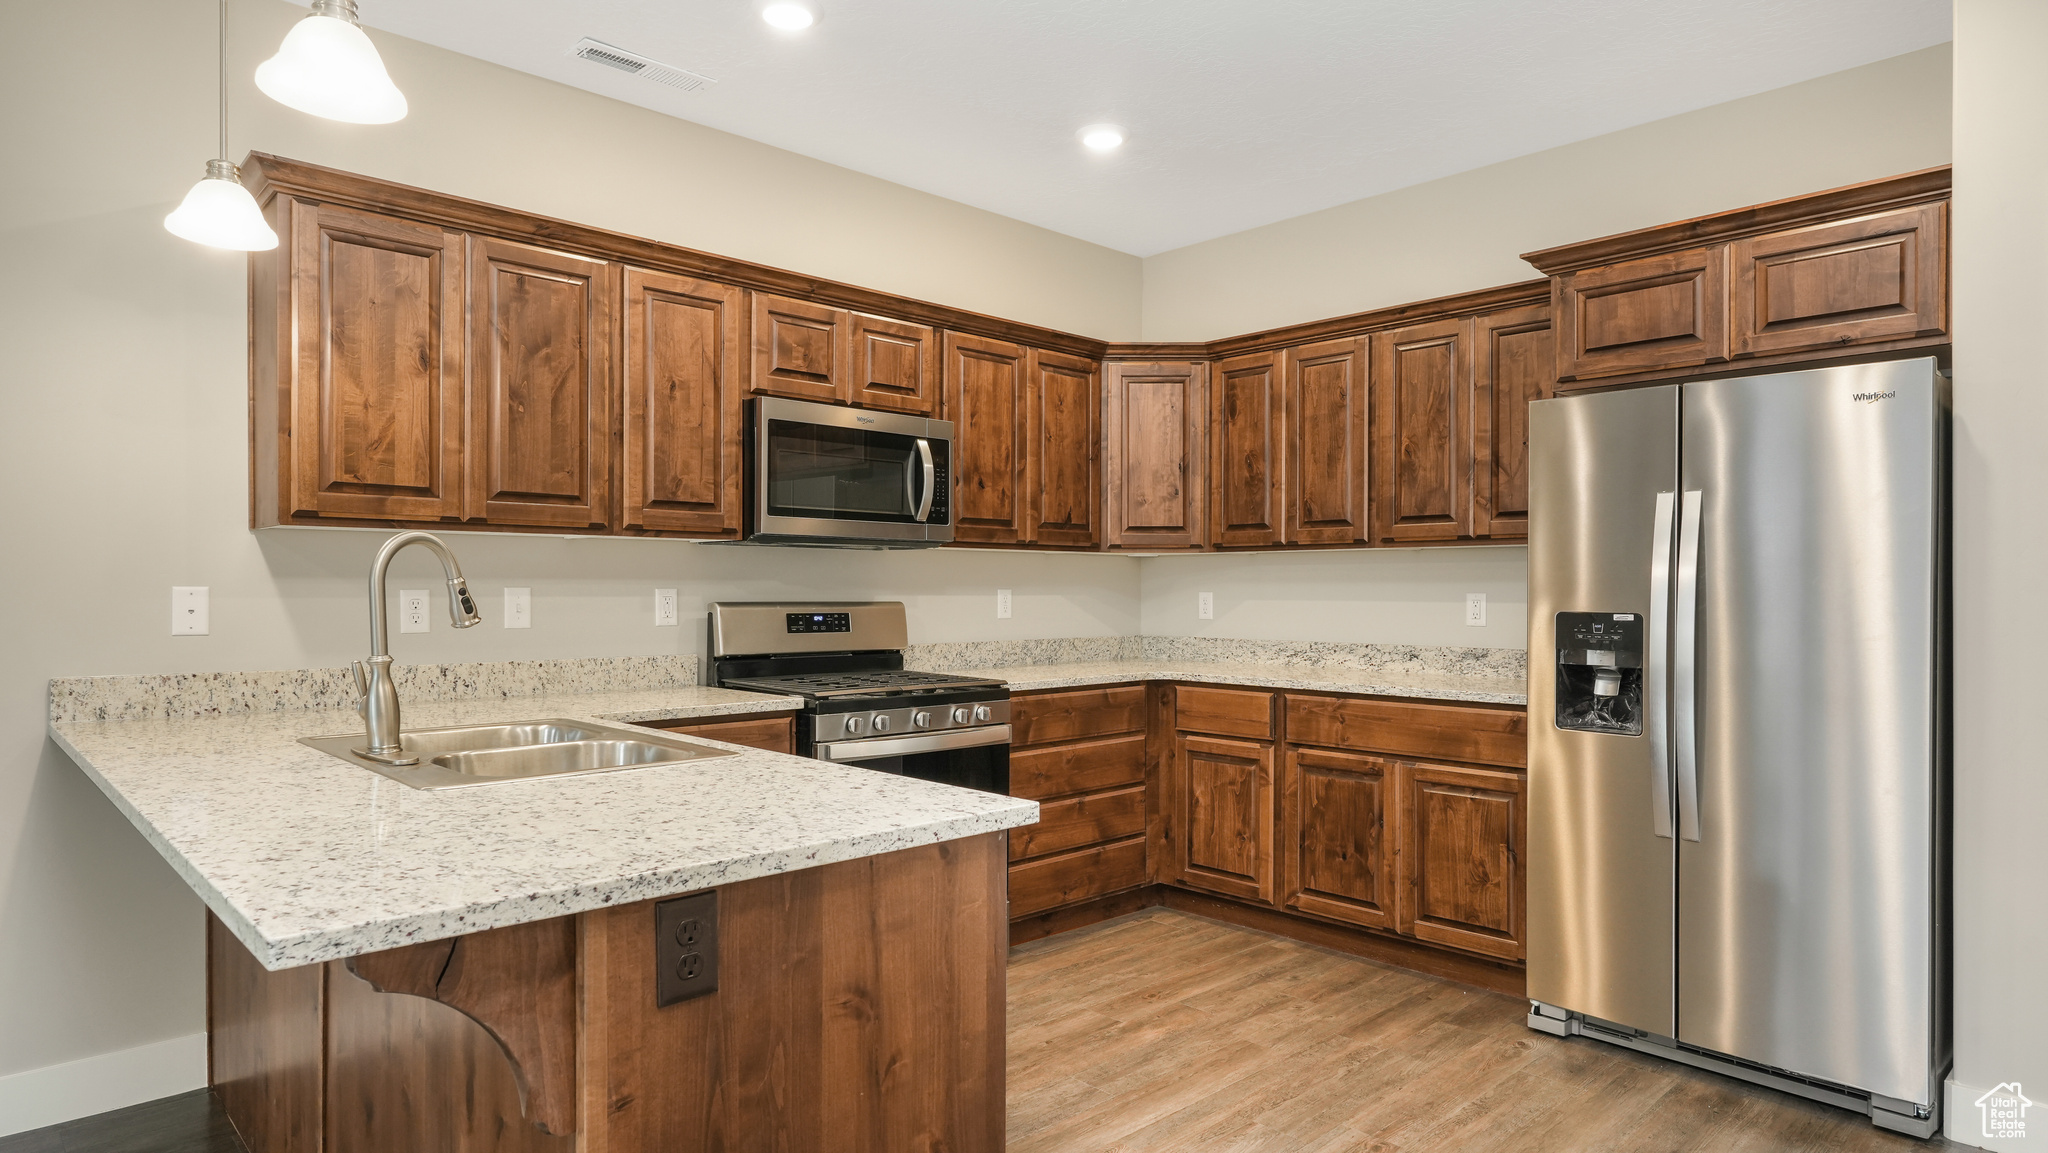 Beautiful kitchen with elevated finishes included stainless steel appliances and gas range!